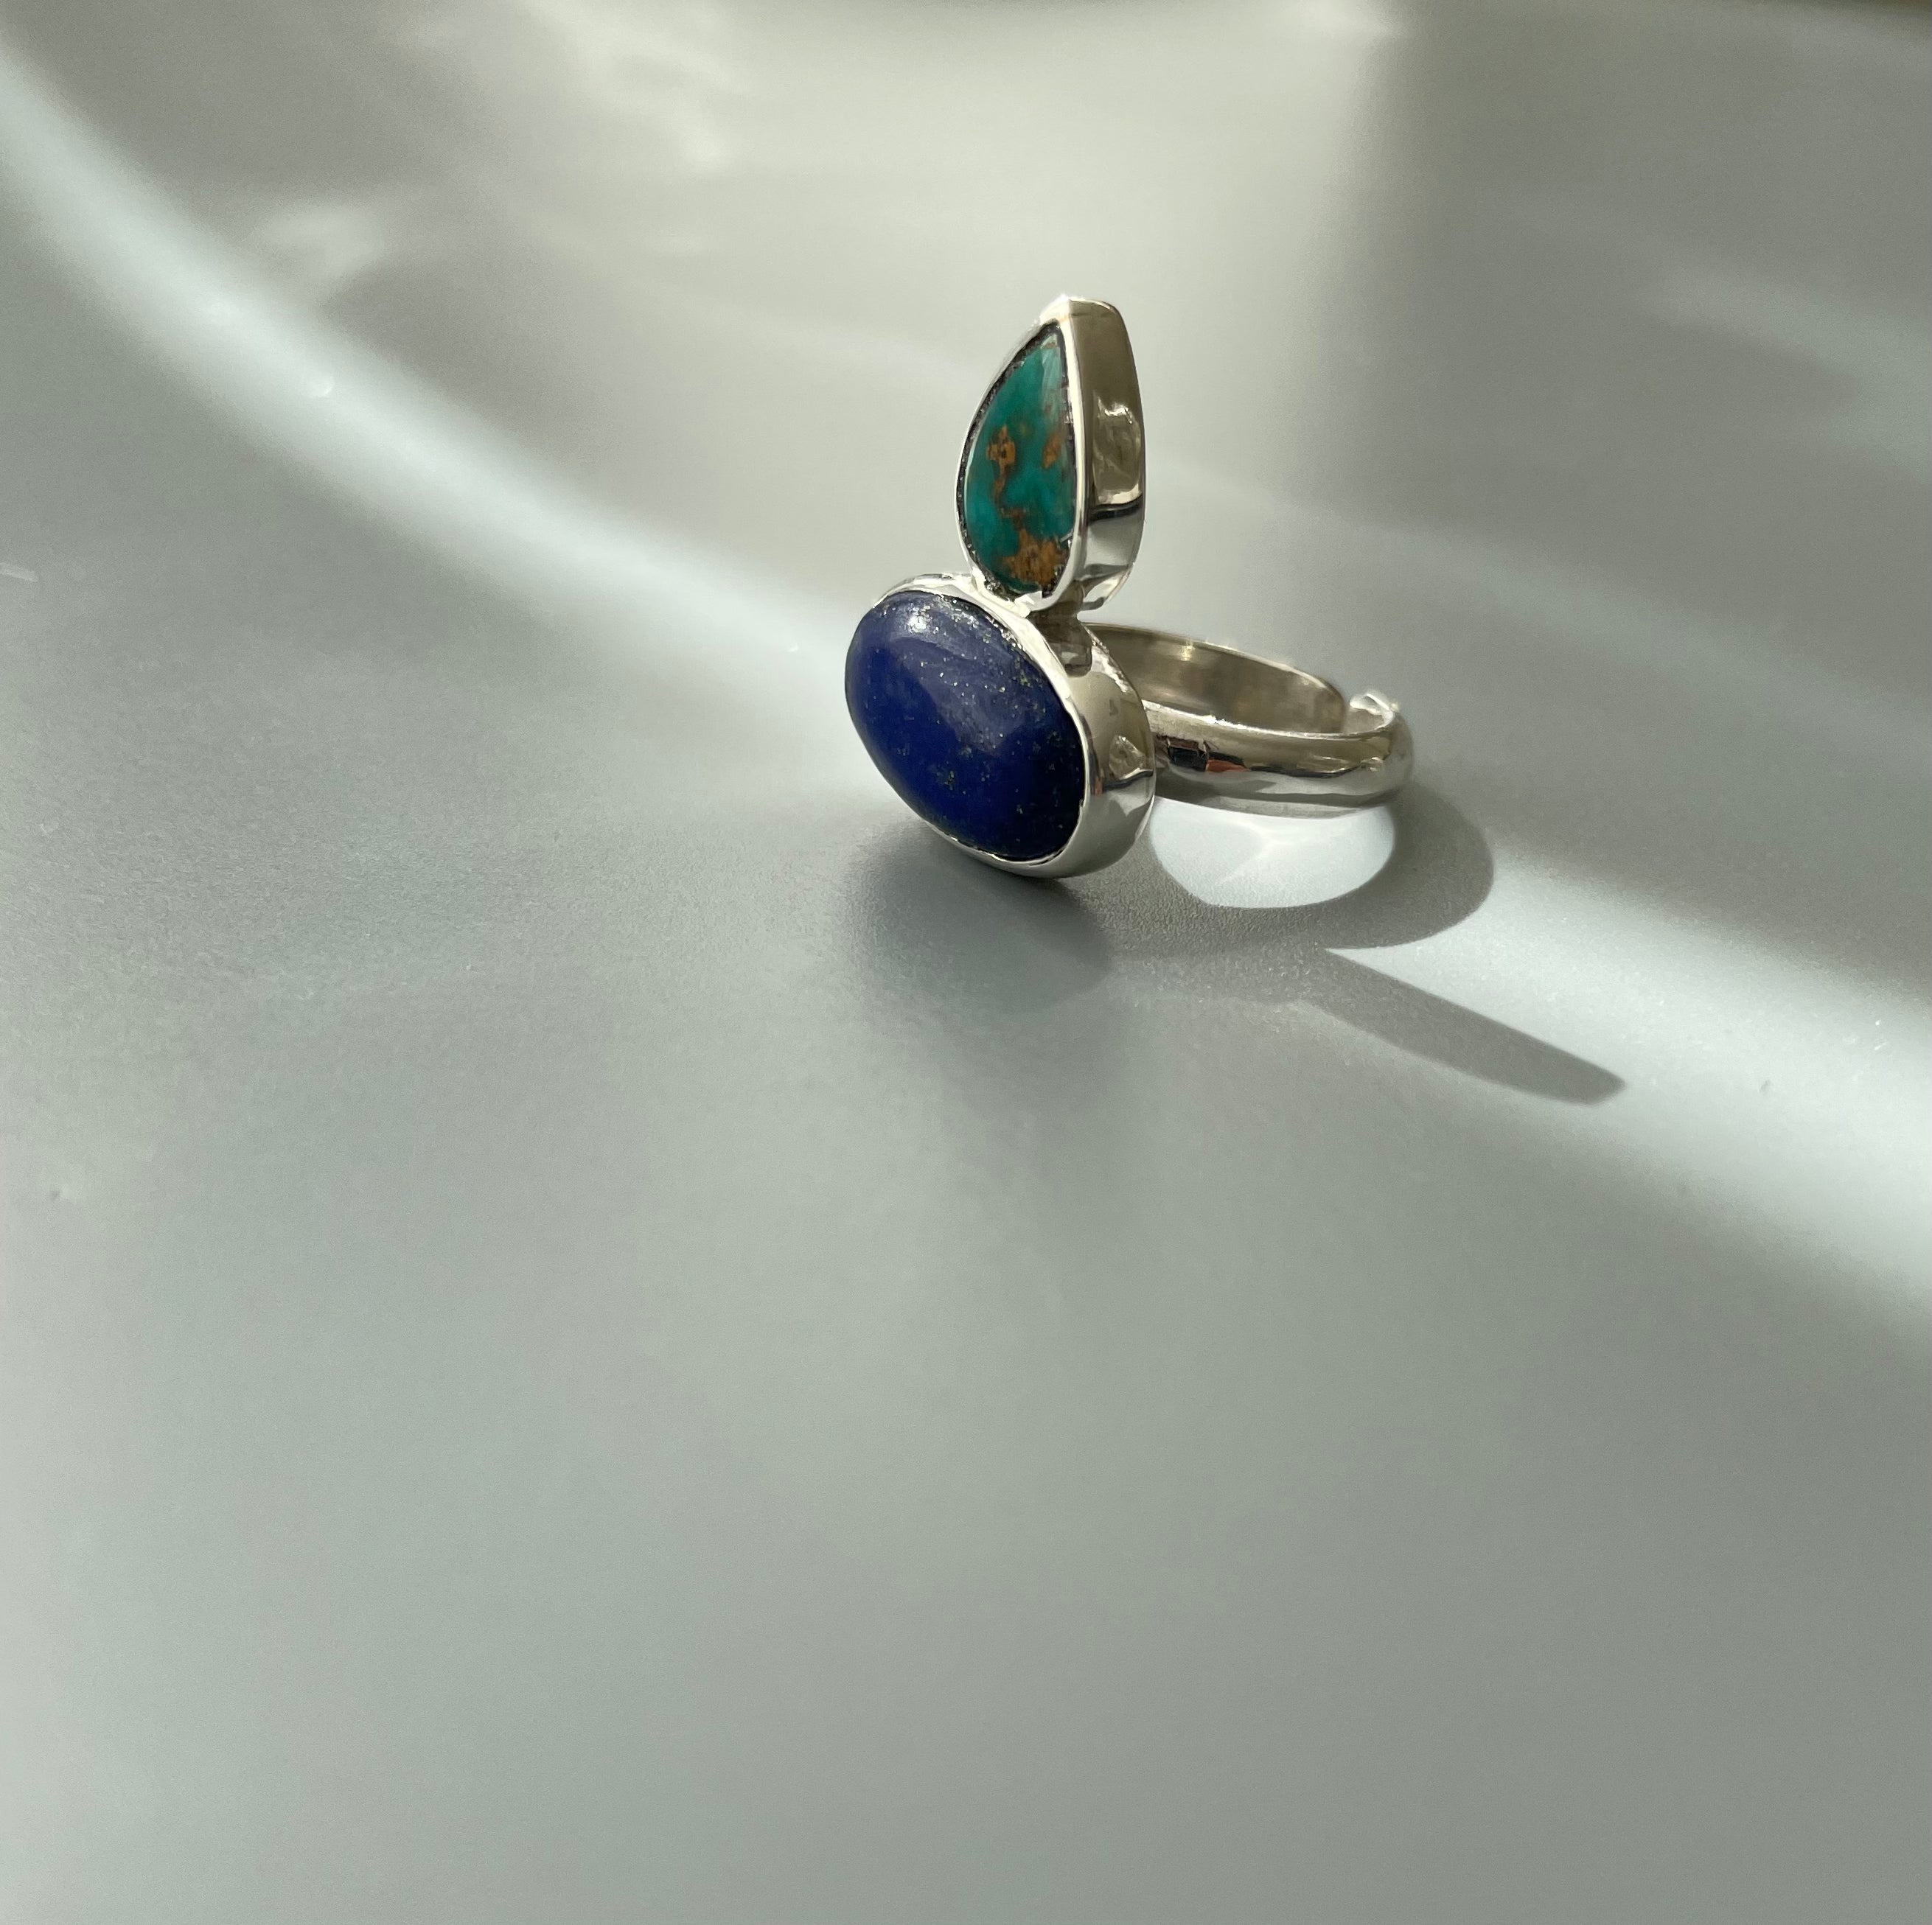 Persian Turquoise Jewelry-Handmade Silver Ring with Turquoise: Persian Jewelry-AFRA ART GALLERY